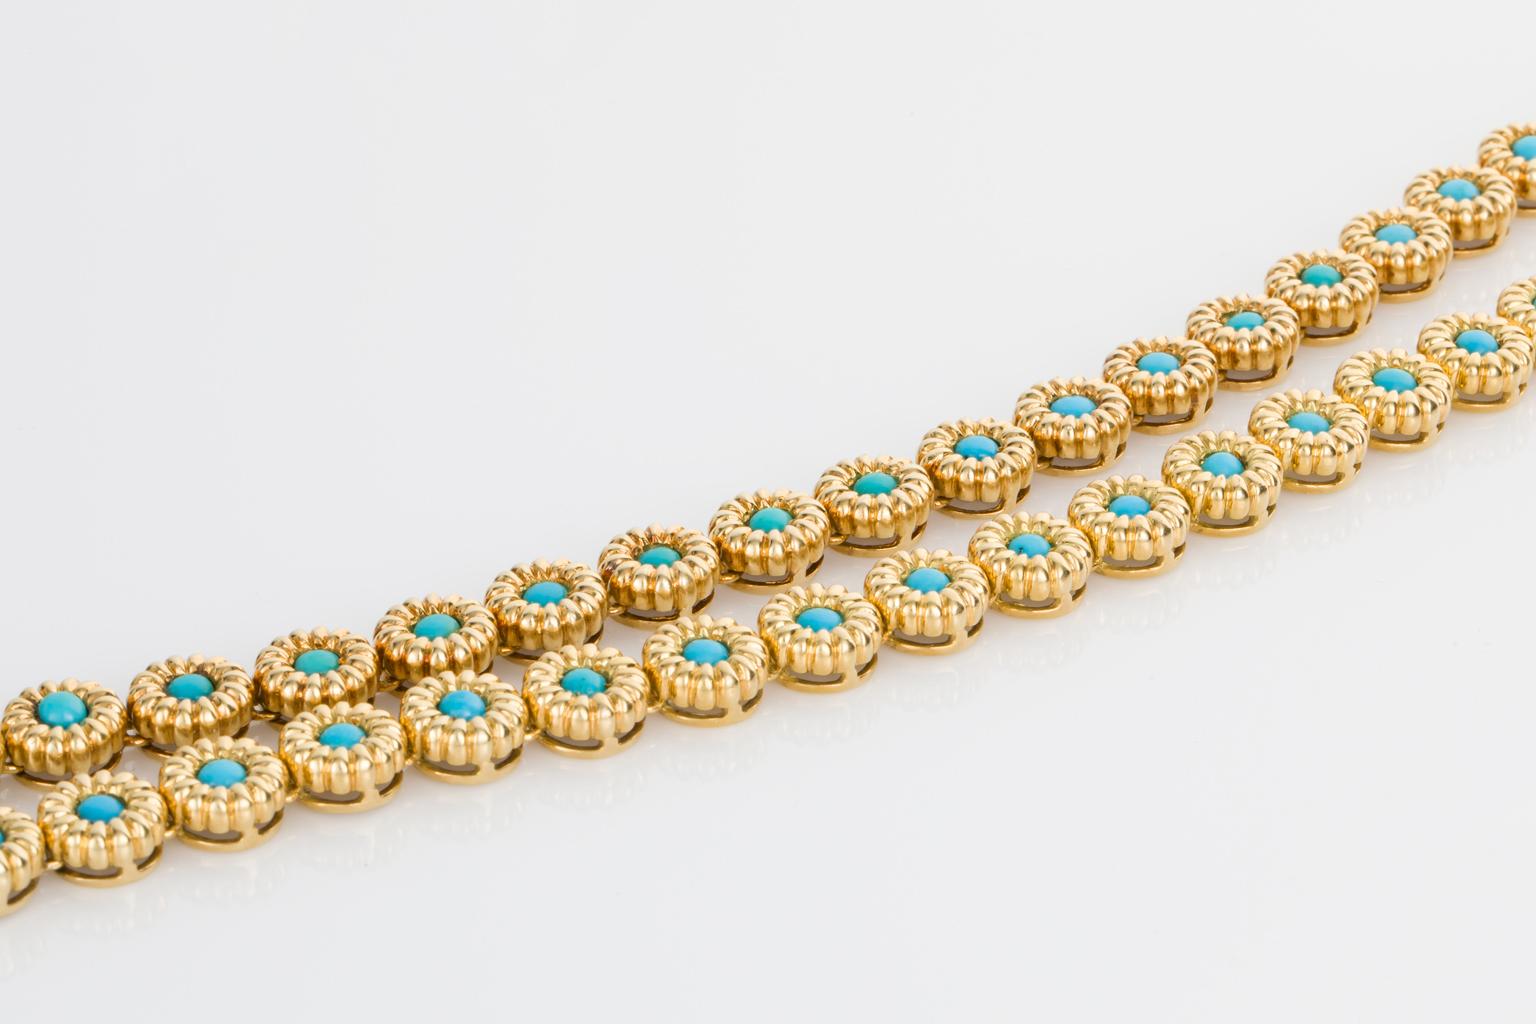 Contemporary 18 Karat Yellow Gold Turquoise Bracelets or Choker Necklace For Sale